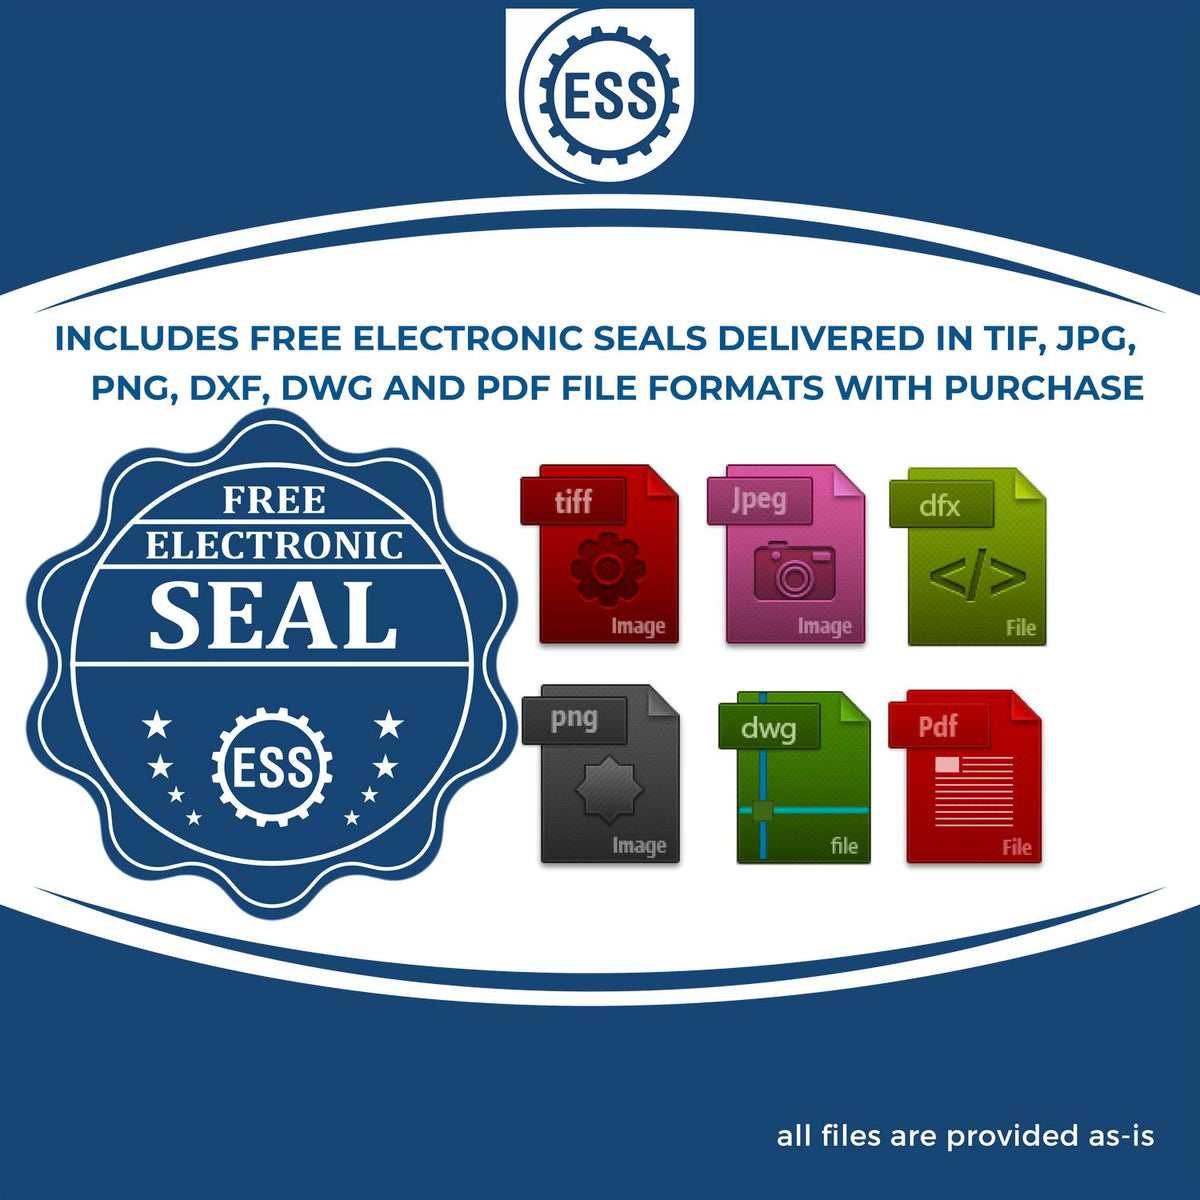 An infographic for the free electronic seal for the Slim Pre-Inked Florida Professional Engineer Seal Stamp illustrating the different file type icons such as DXF, DWG, TIF, JPG and PNG.